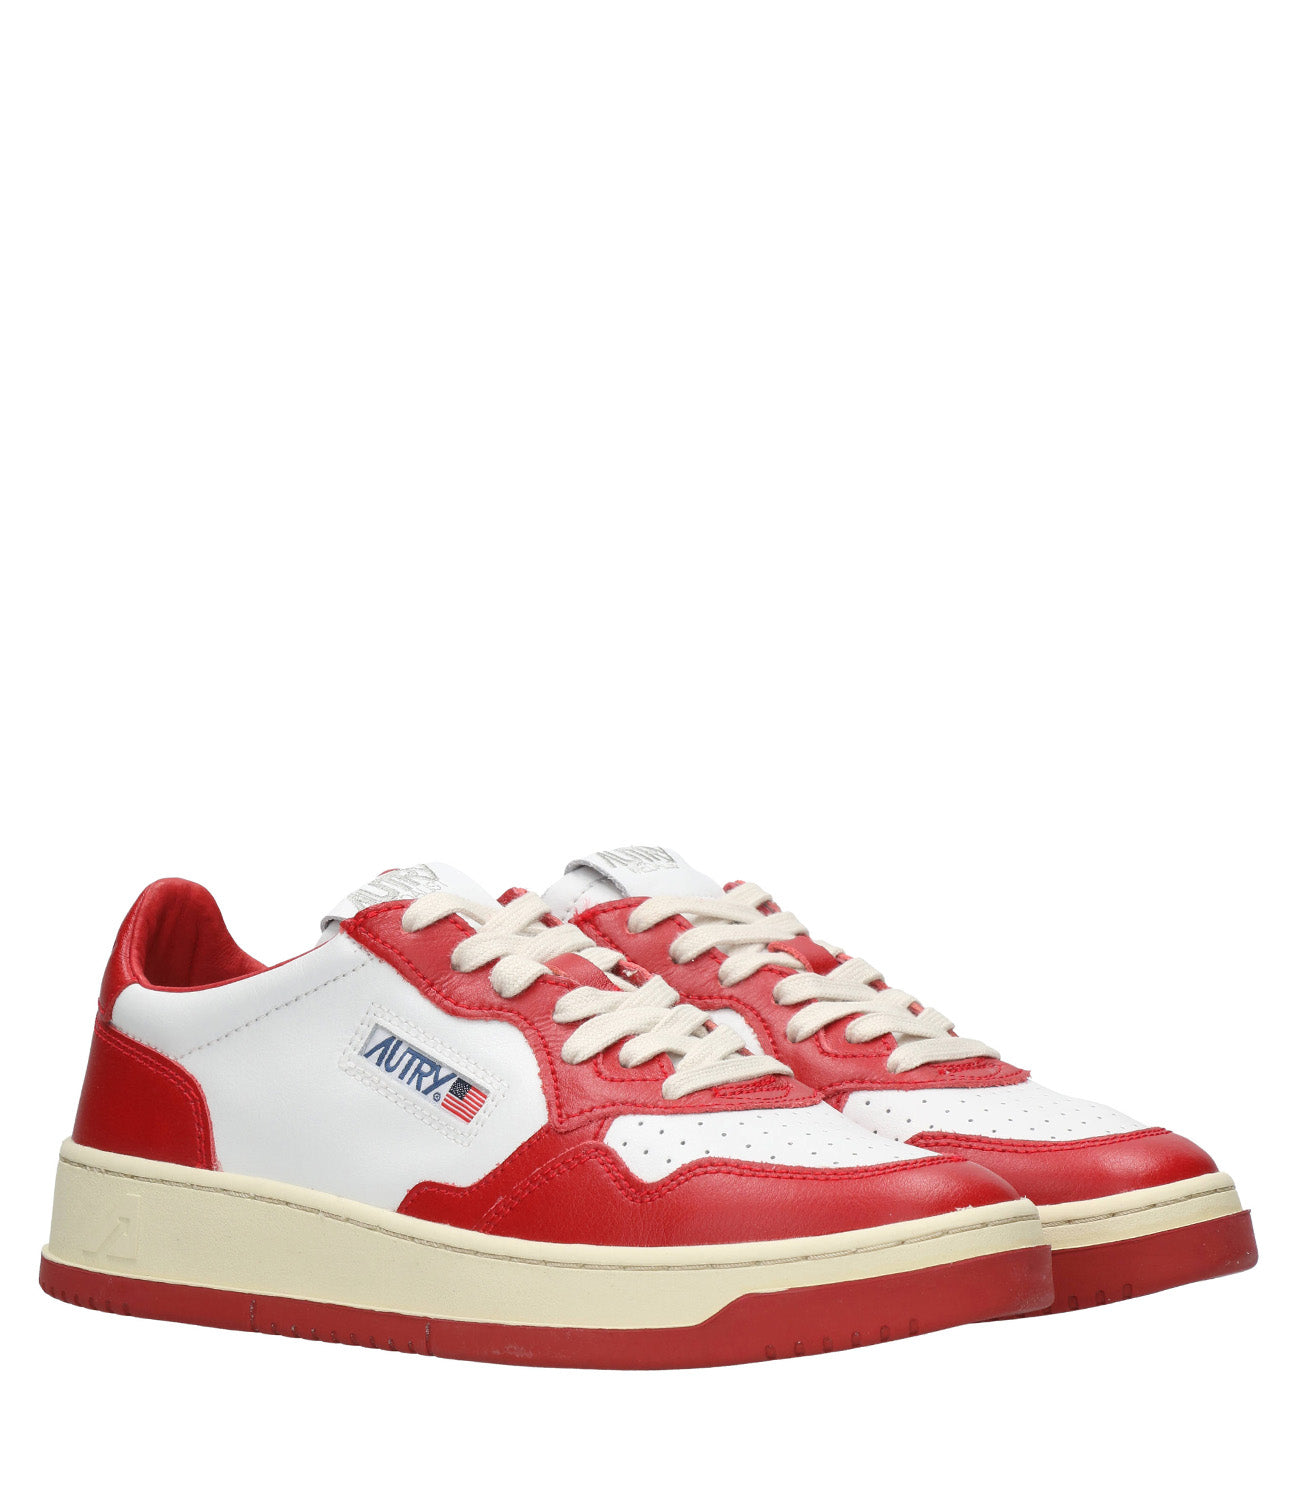 Autry | Medalist Low White and Red Sneakers